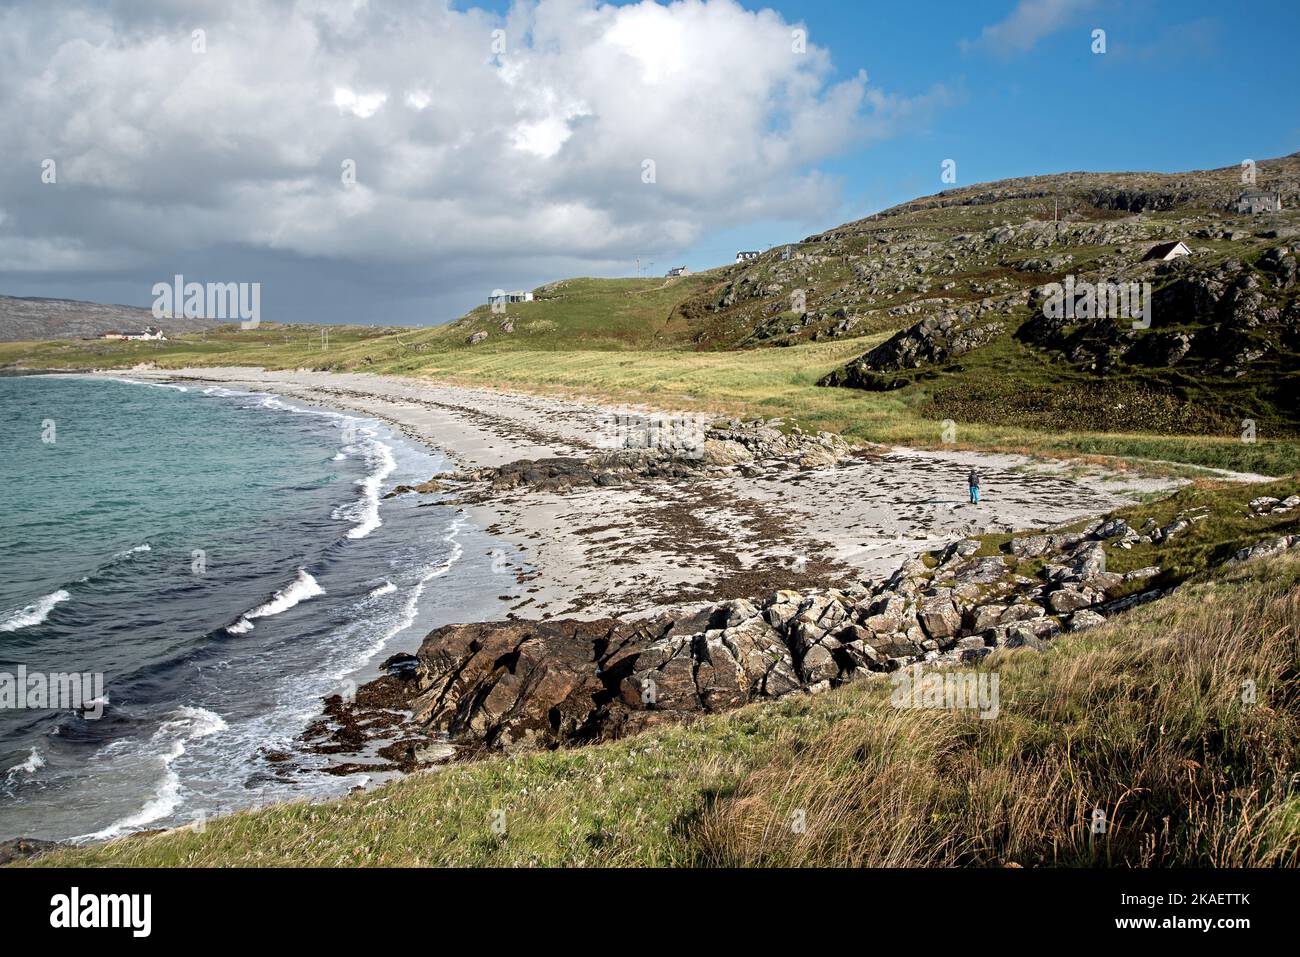 Prince's Bay, the beach were Bonnie Prince Charlie first arrived in Scotland, on the Isle of Eriskay, Outer Hebrides, Scotland. Stock Photo